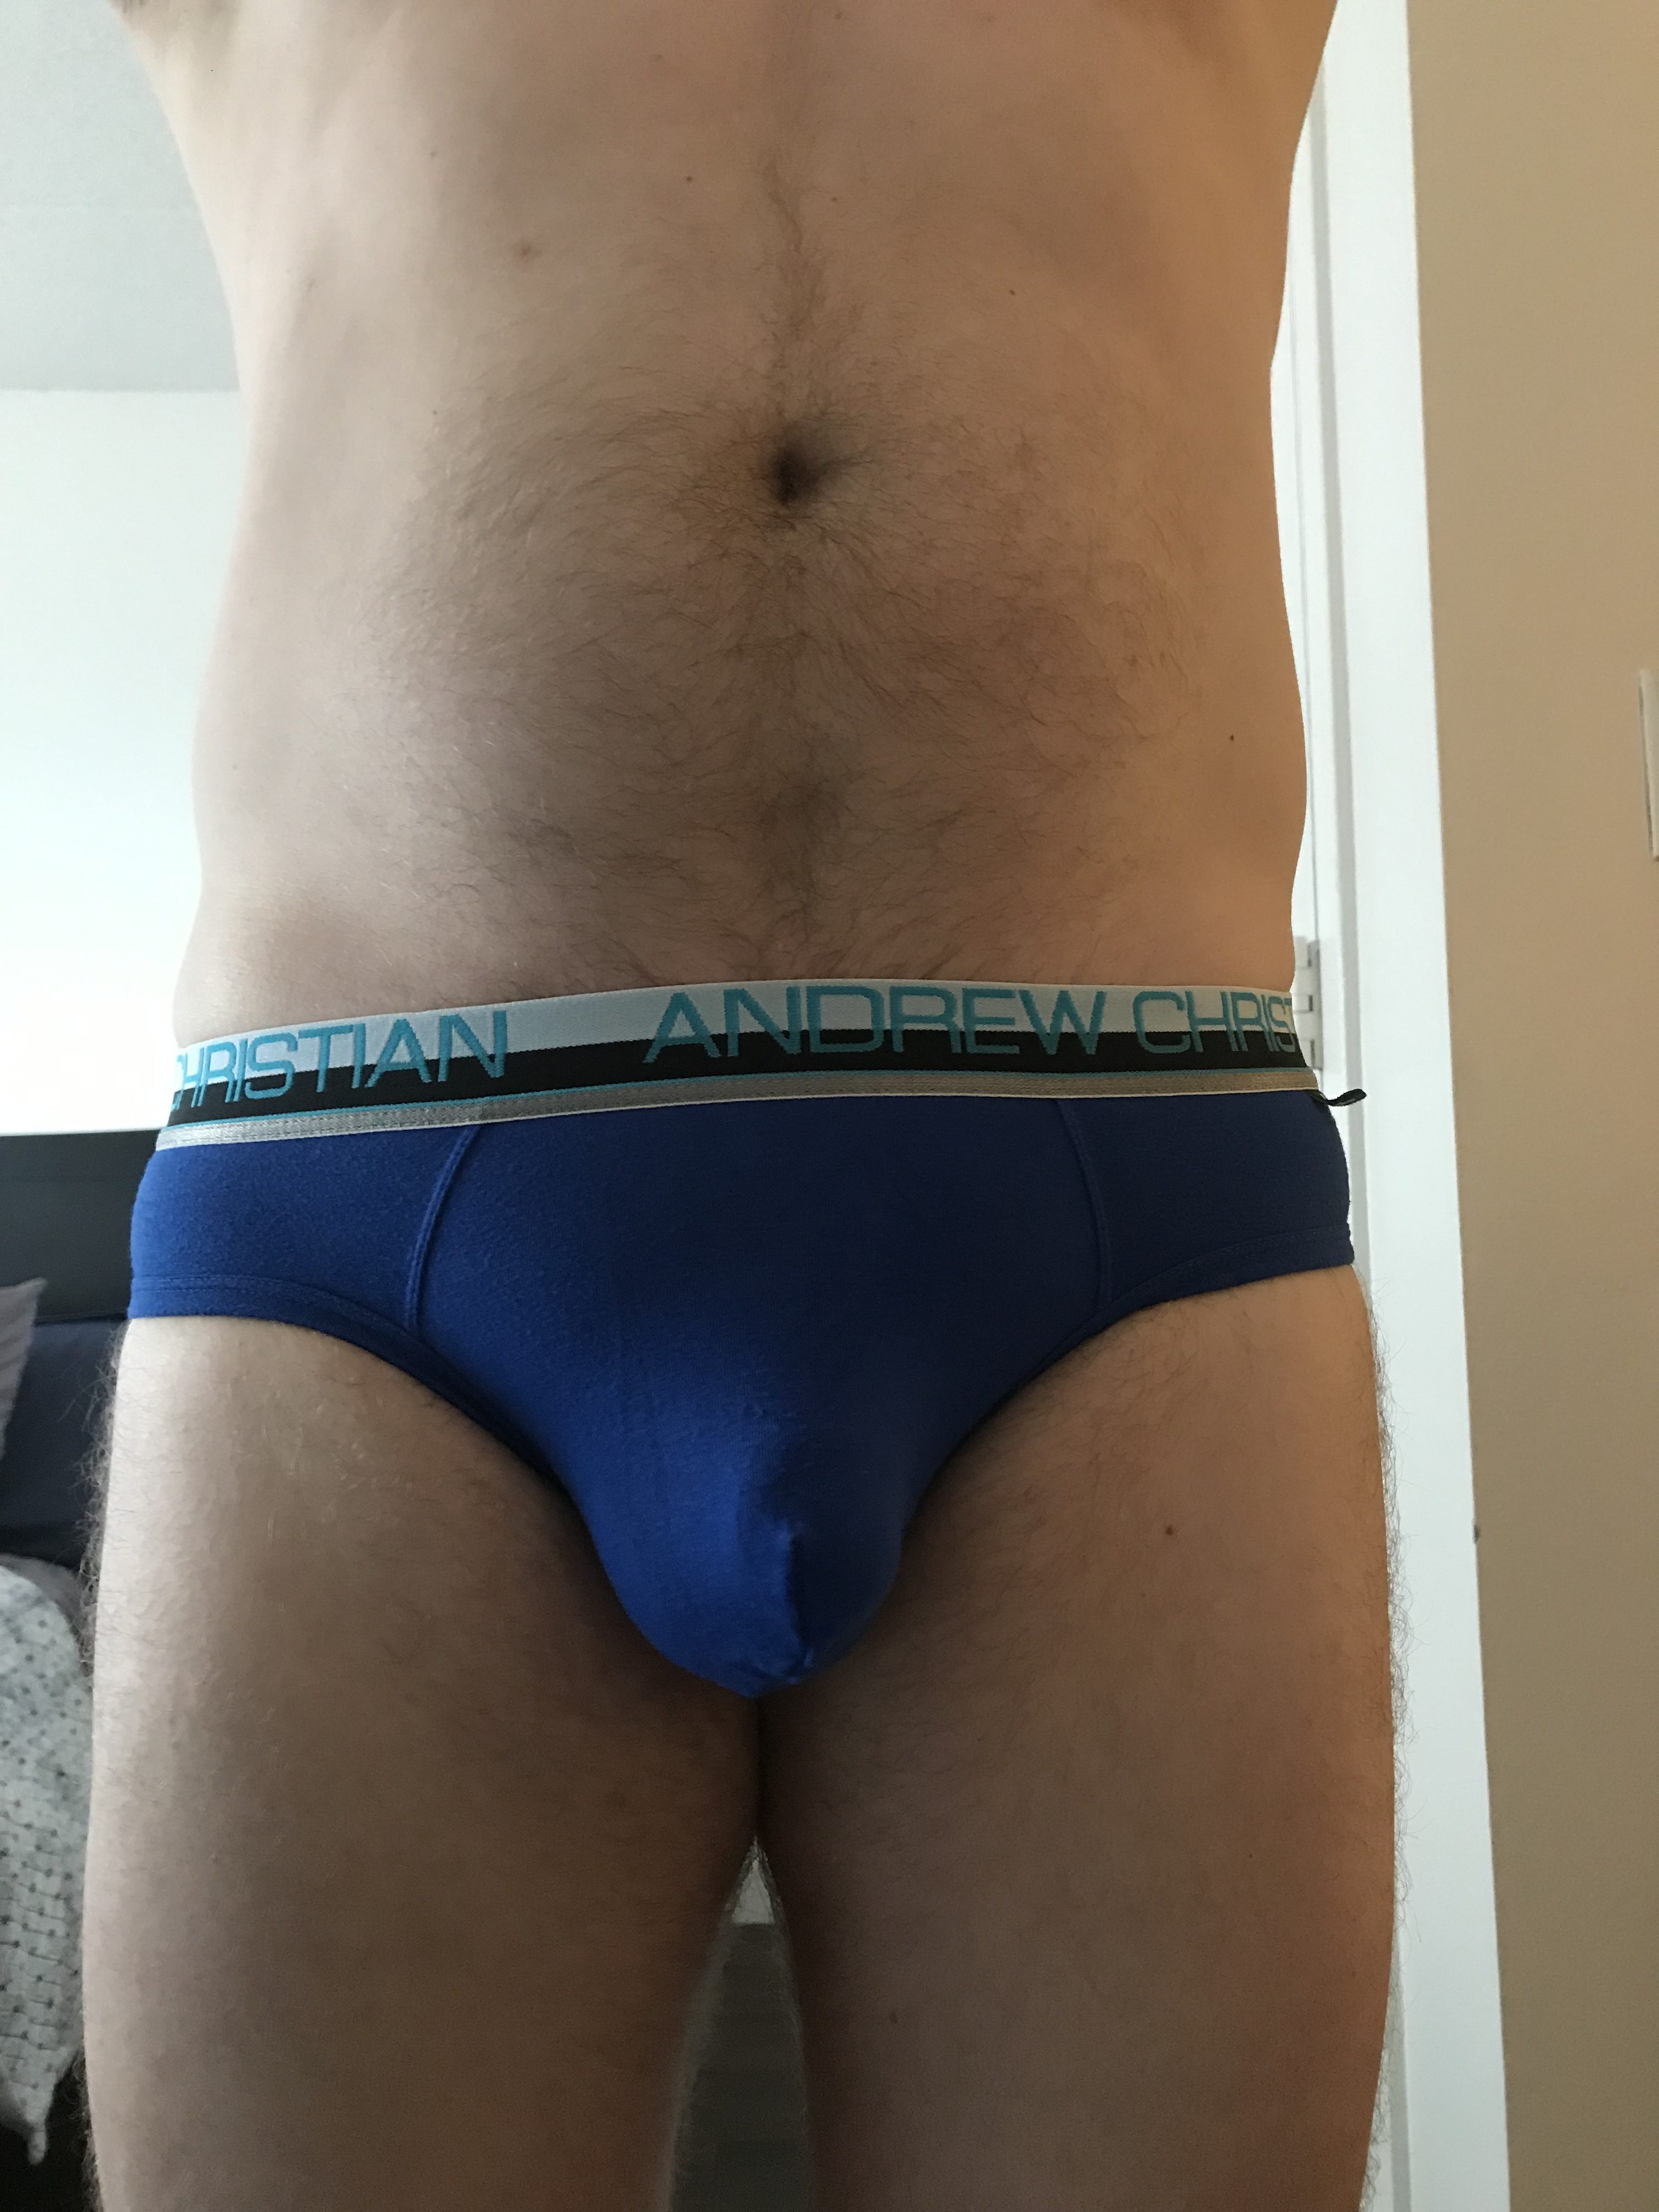 Air-Jock in bright blue for hump day…